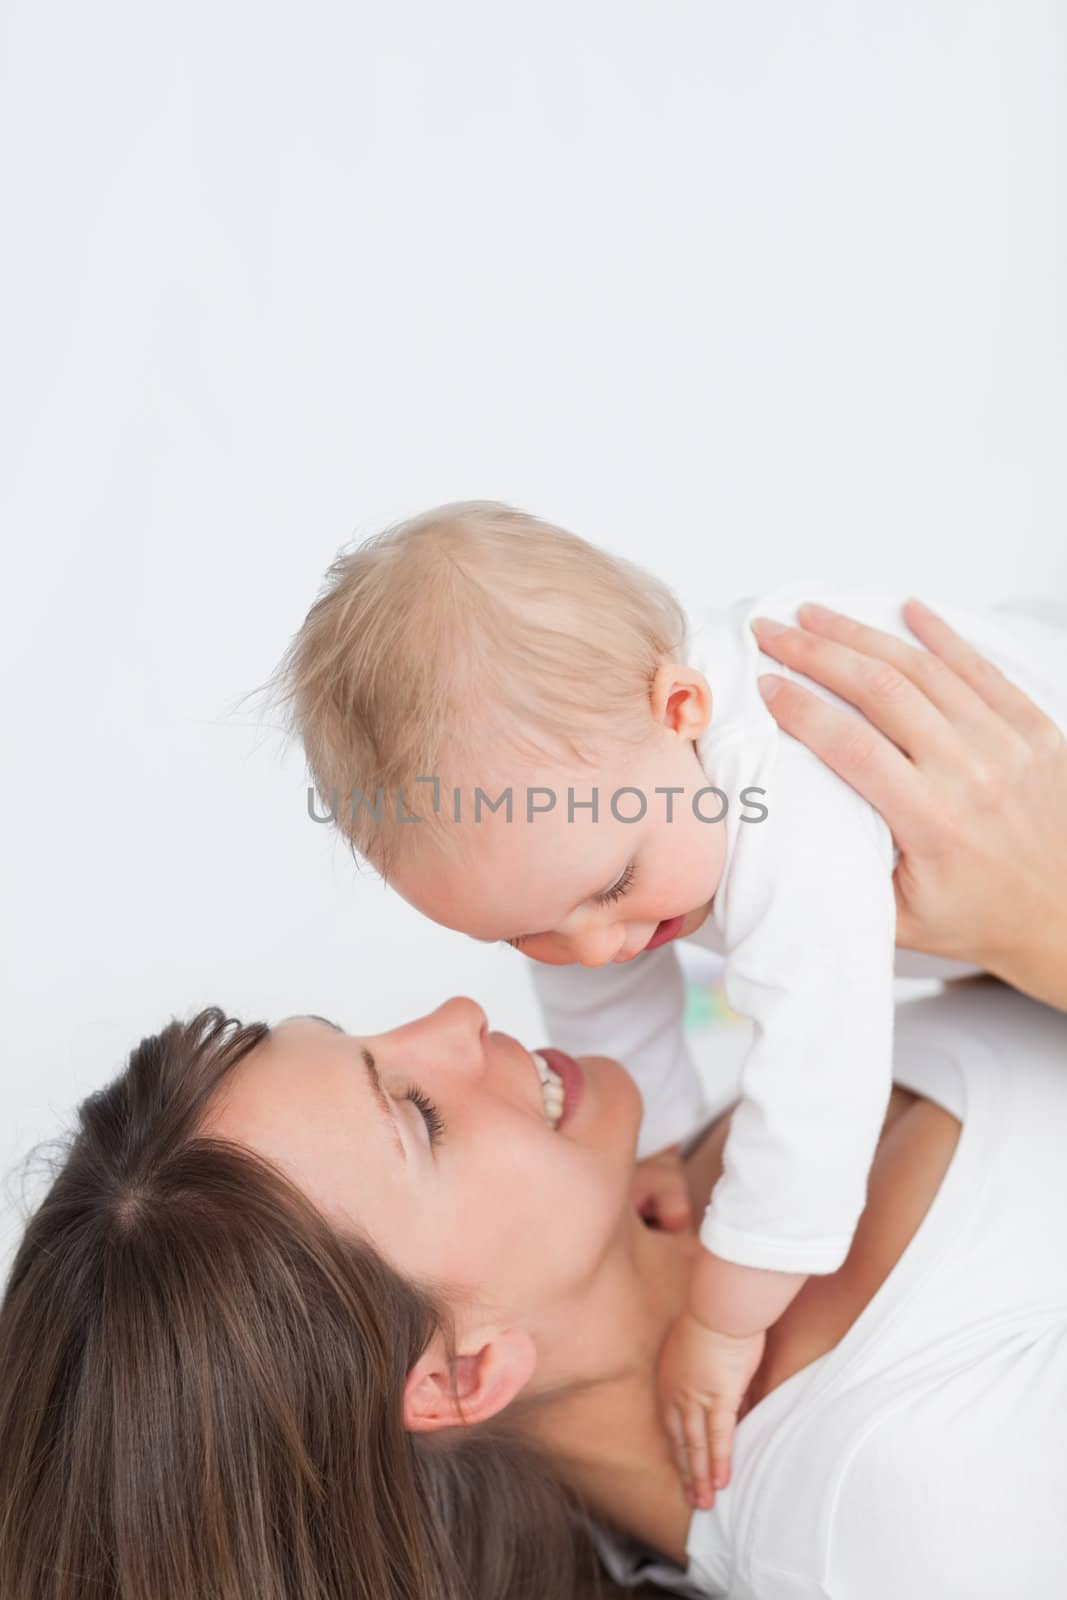 Smiling brunette woman playing with her baby against a grey background